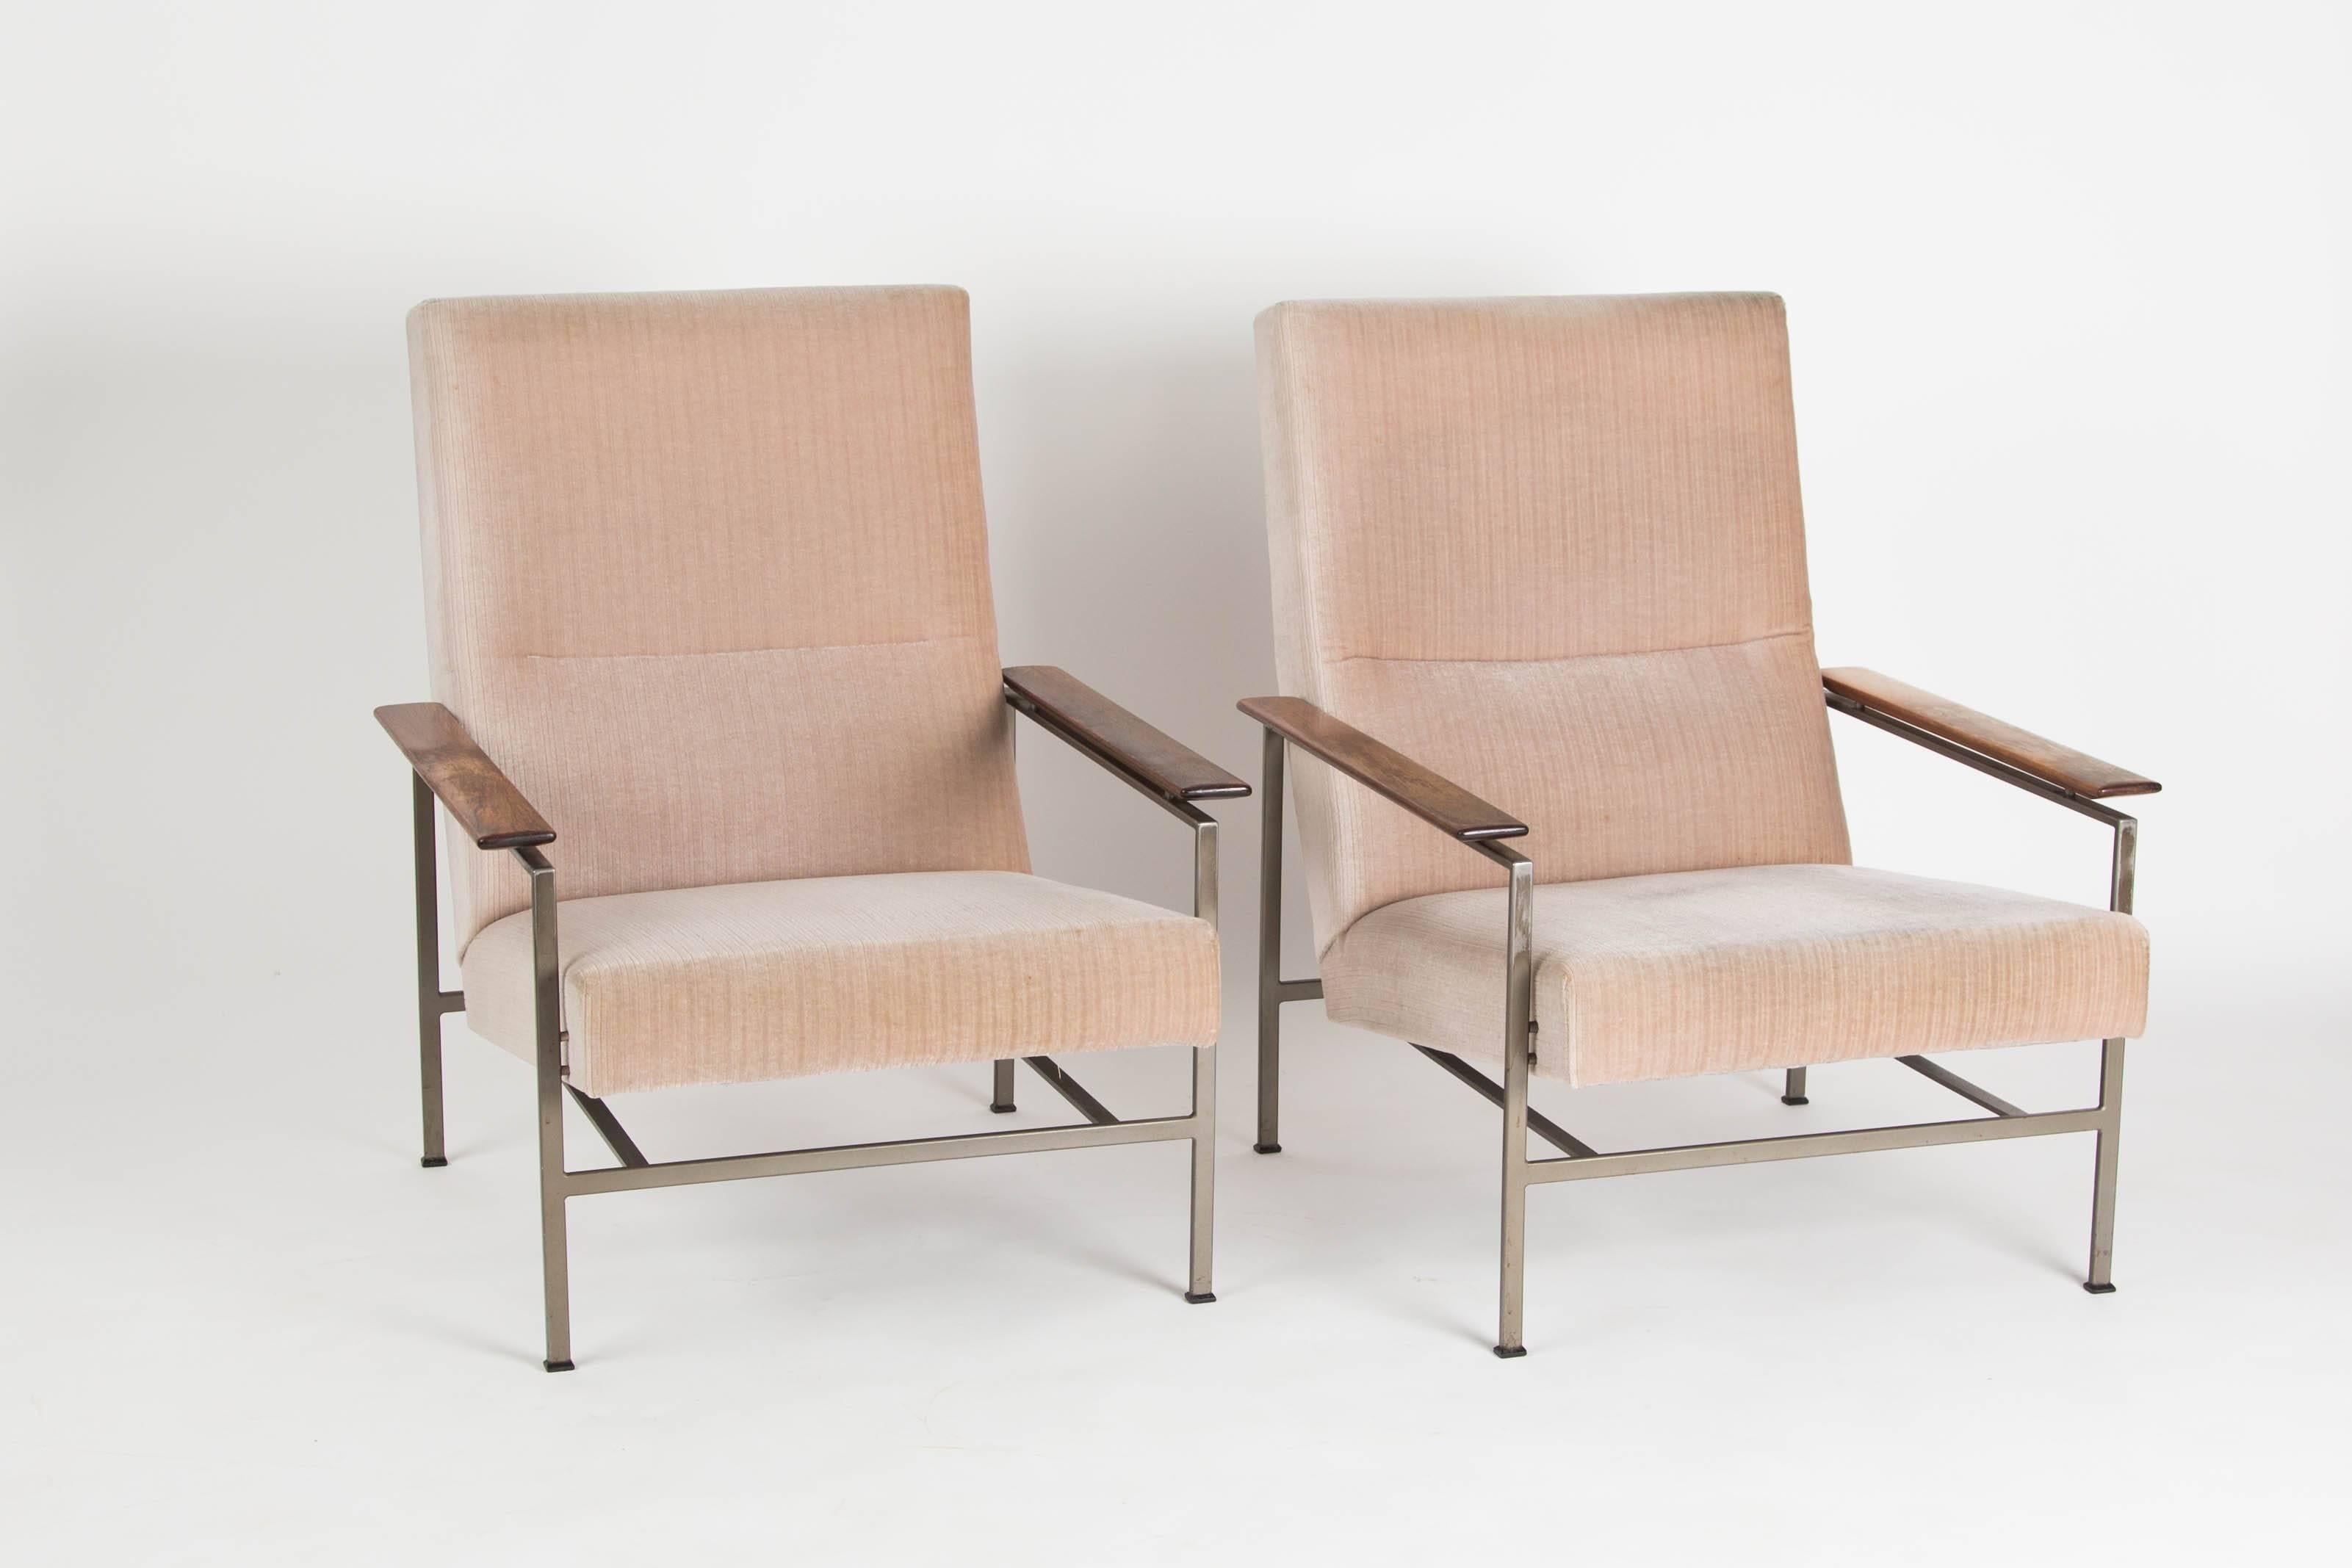 A set of Dutch designer Rob Parry. The two chairs and the sofa have a flat steel frame. Very graphic and transparent. The color of the frame is grey. The armrests are of rosewood. The fabric is velour. The length of the sofa is 170cm depth 85cm and